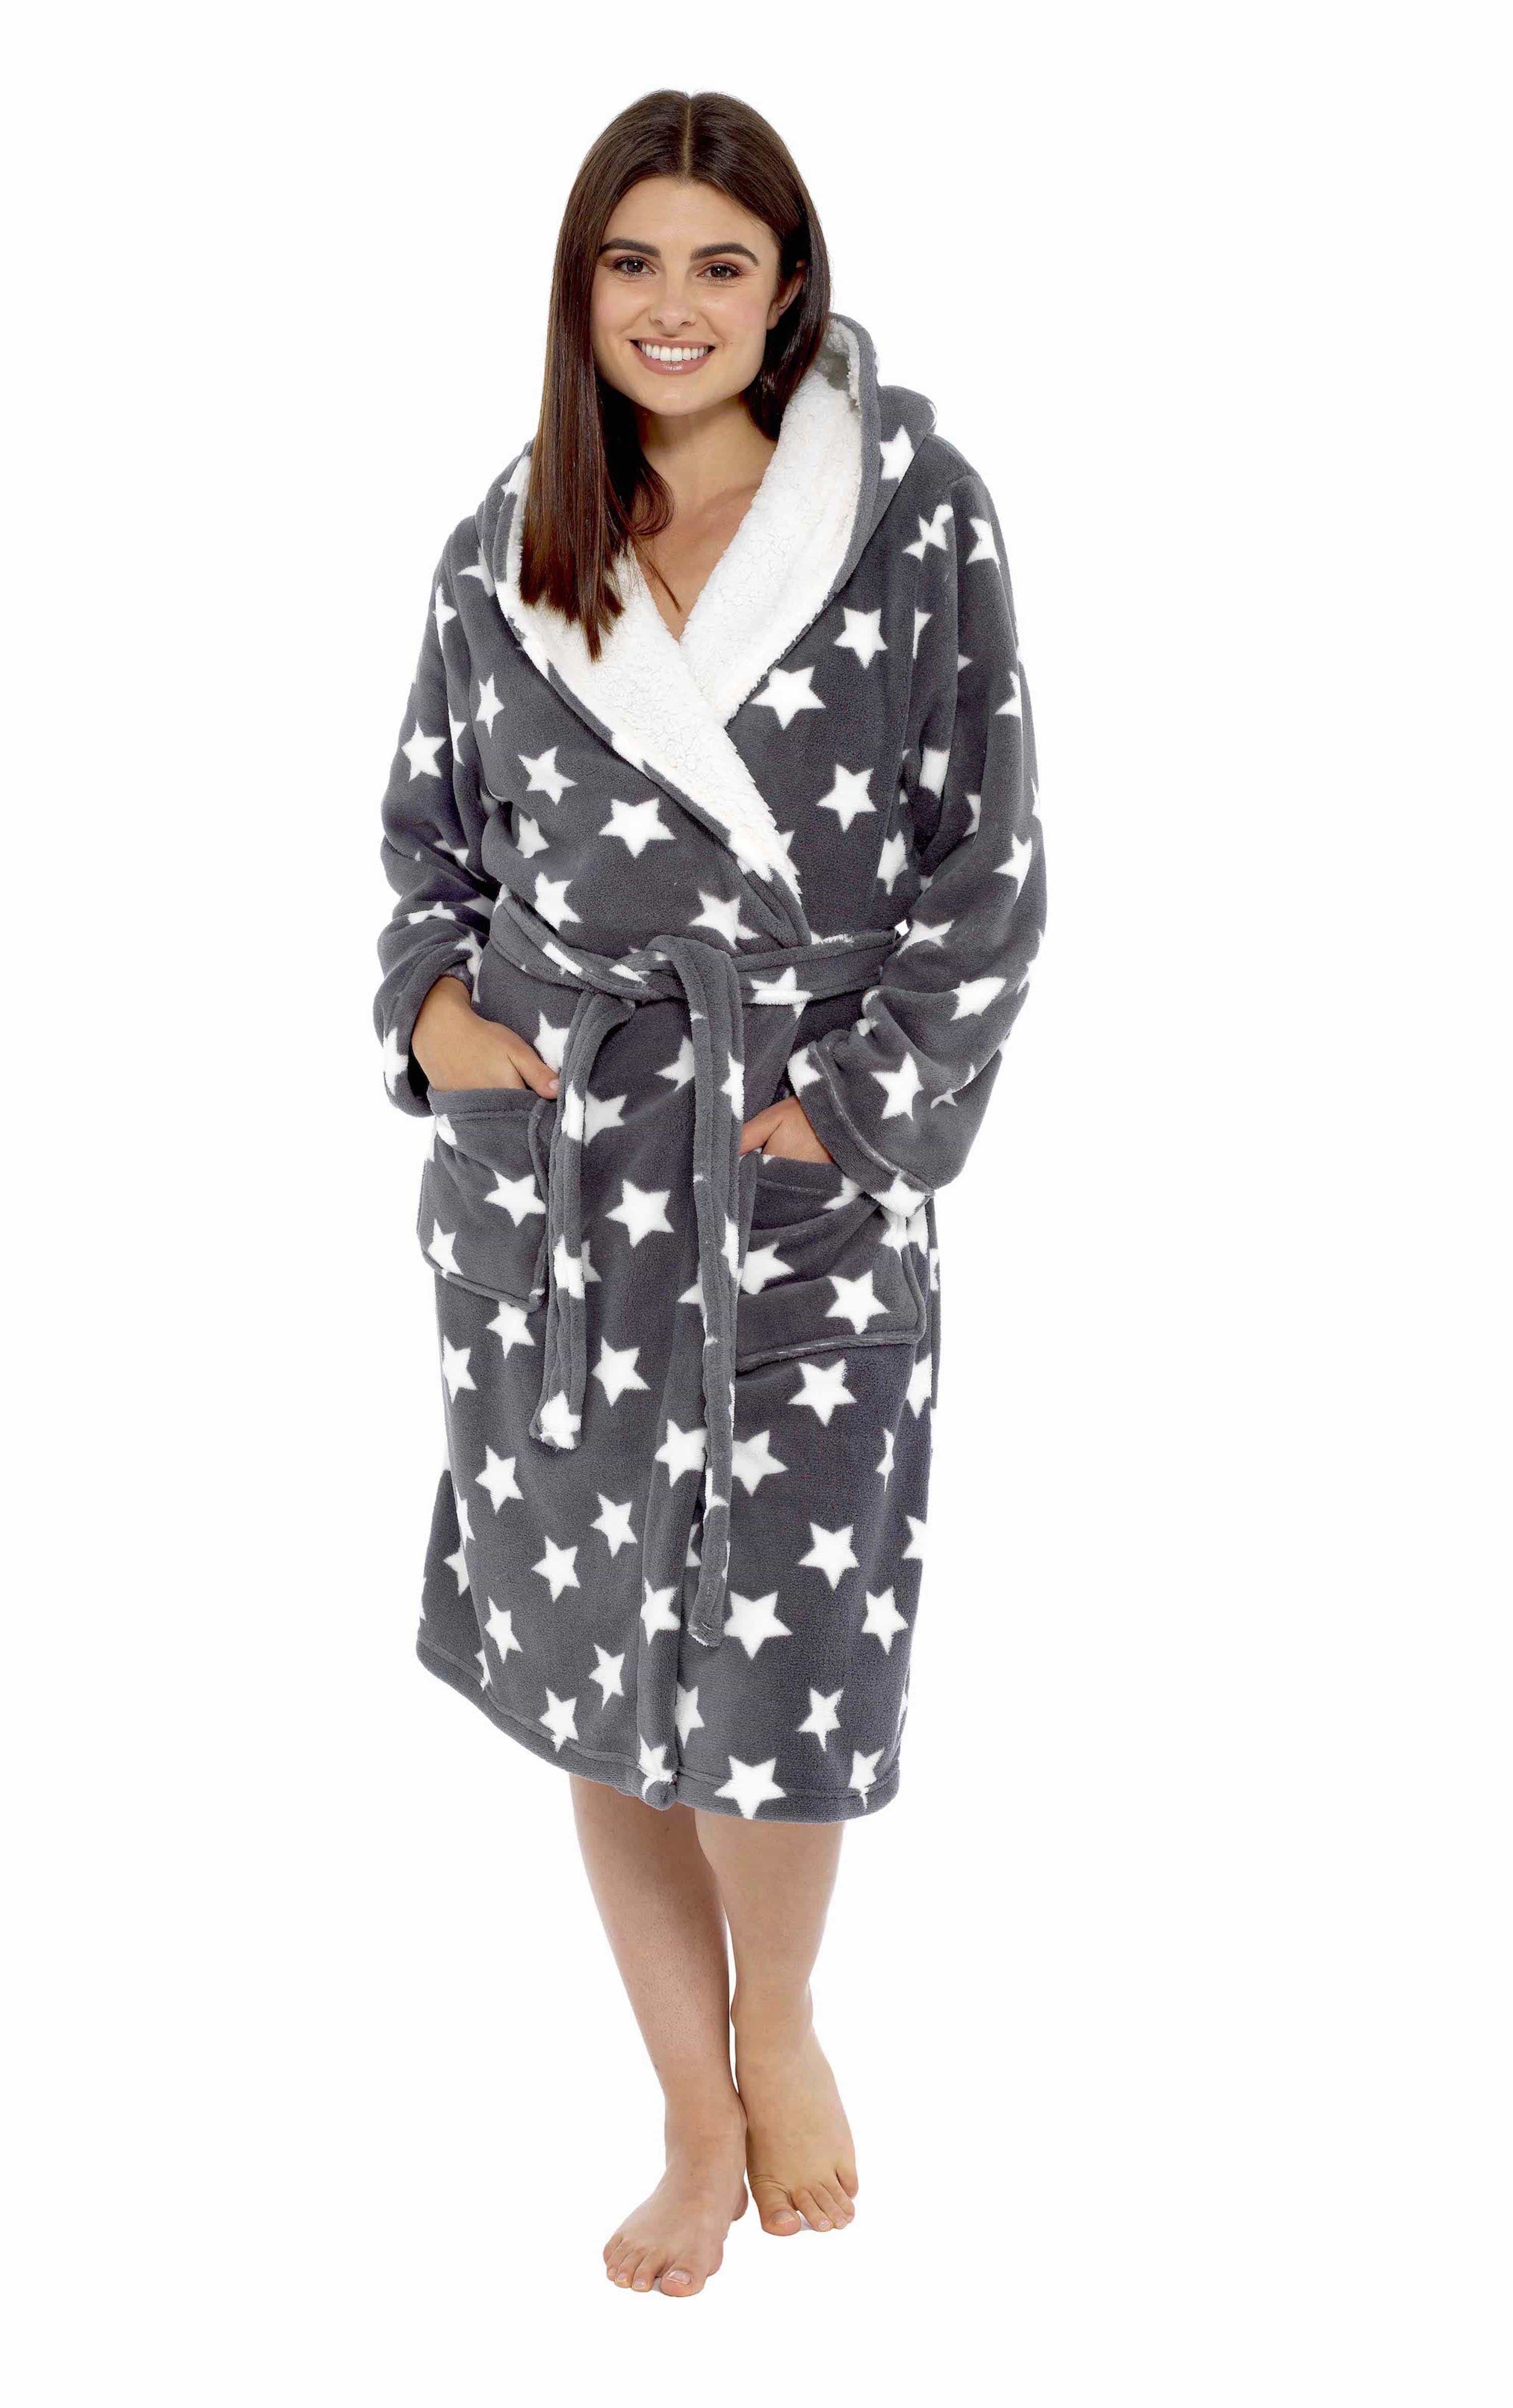 stars plush fleece hooded robe dressing gown with reversible sherpa lining daisy dreamer dressing gown 28614159597640